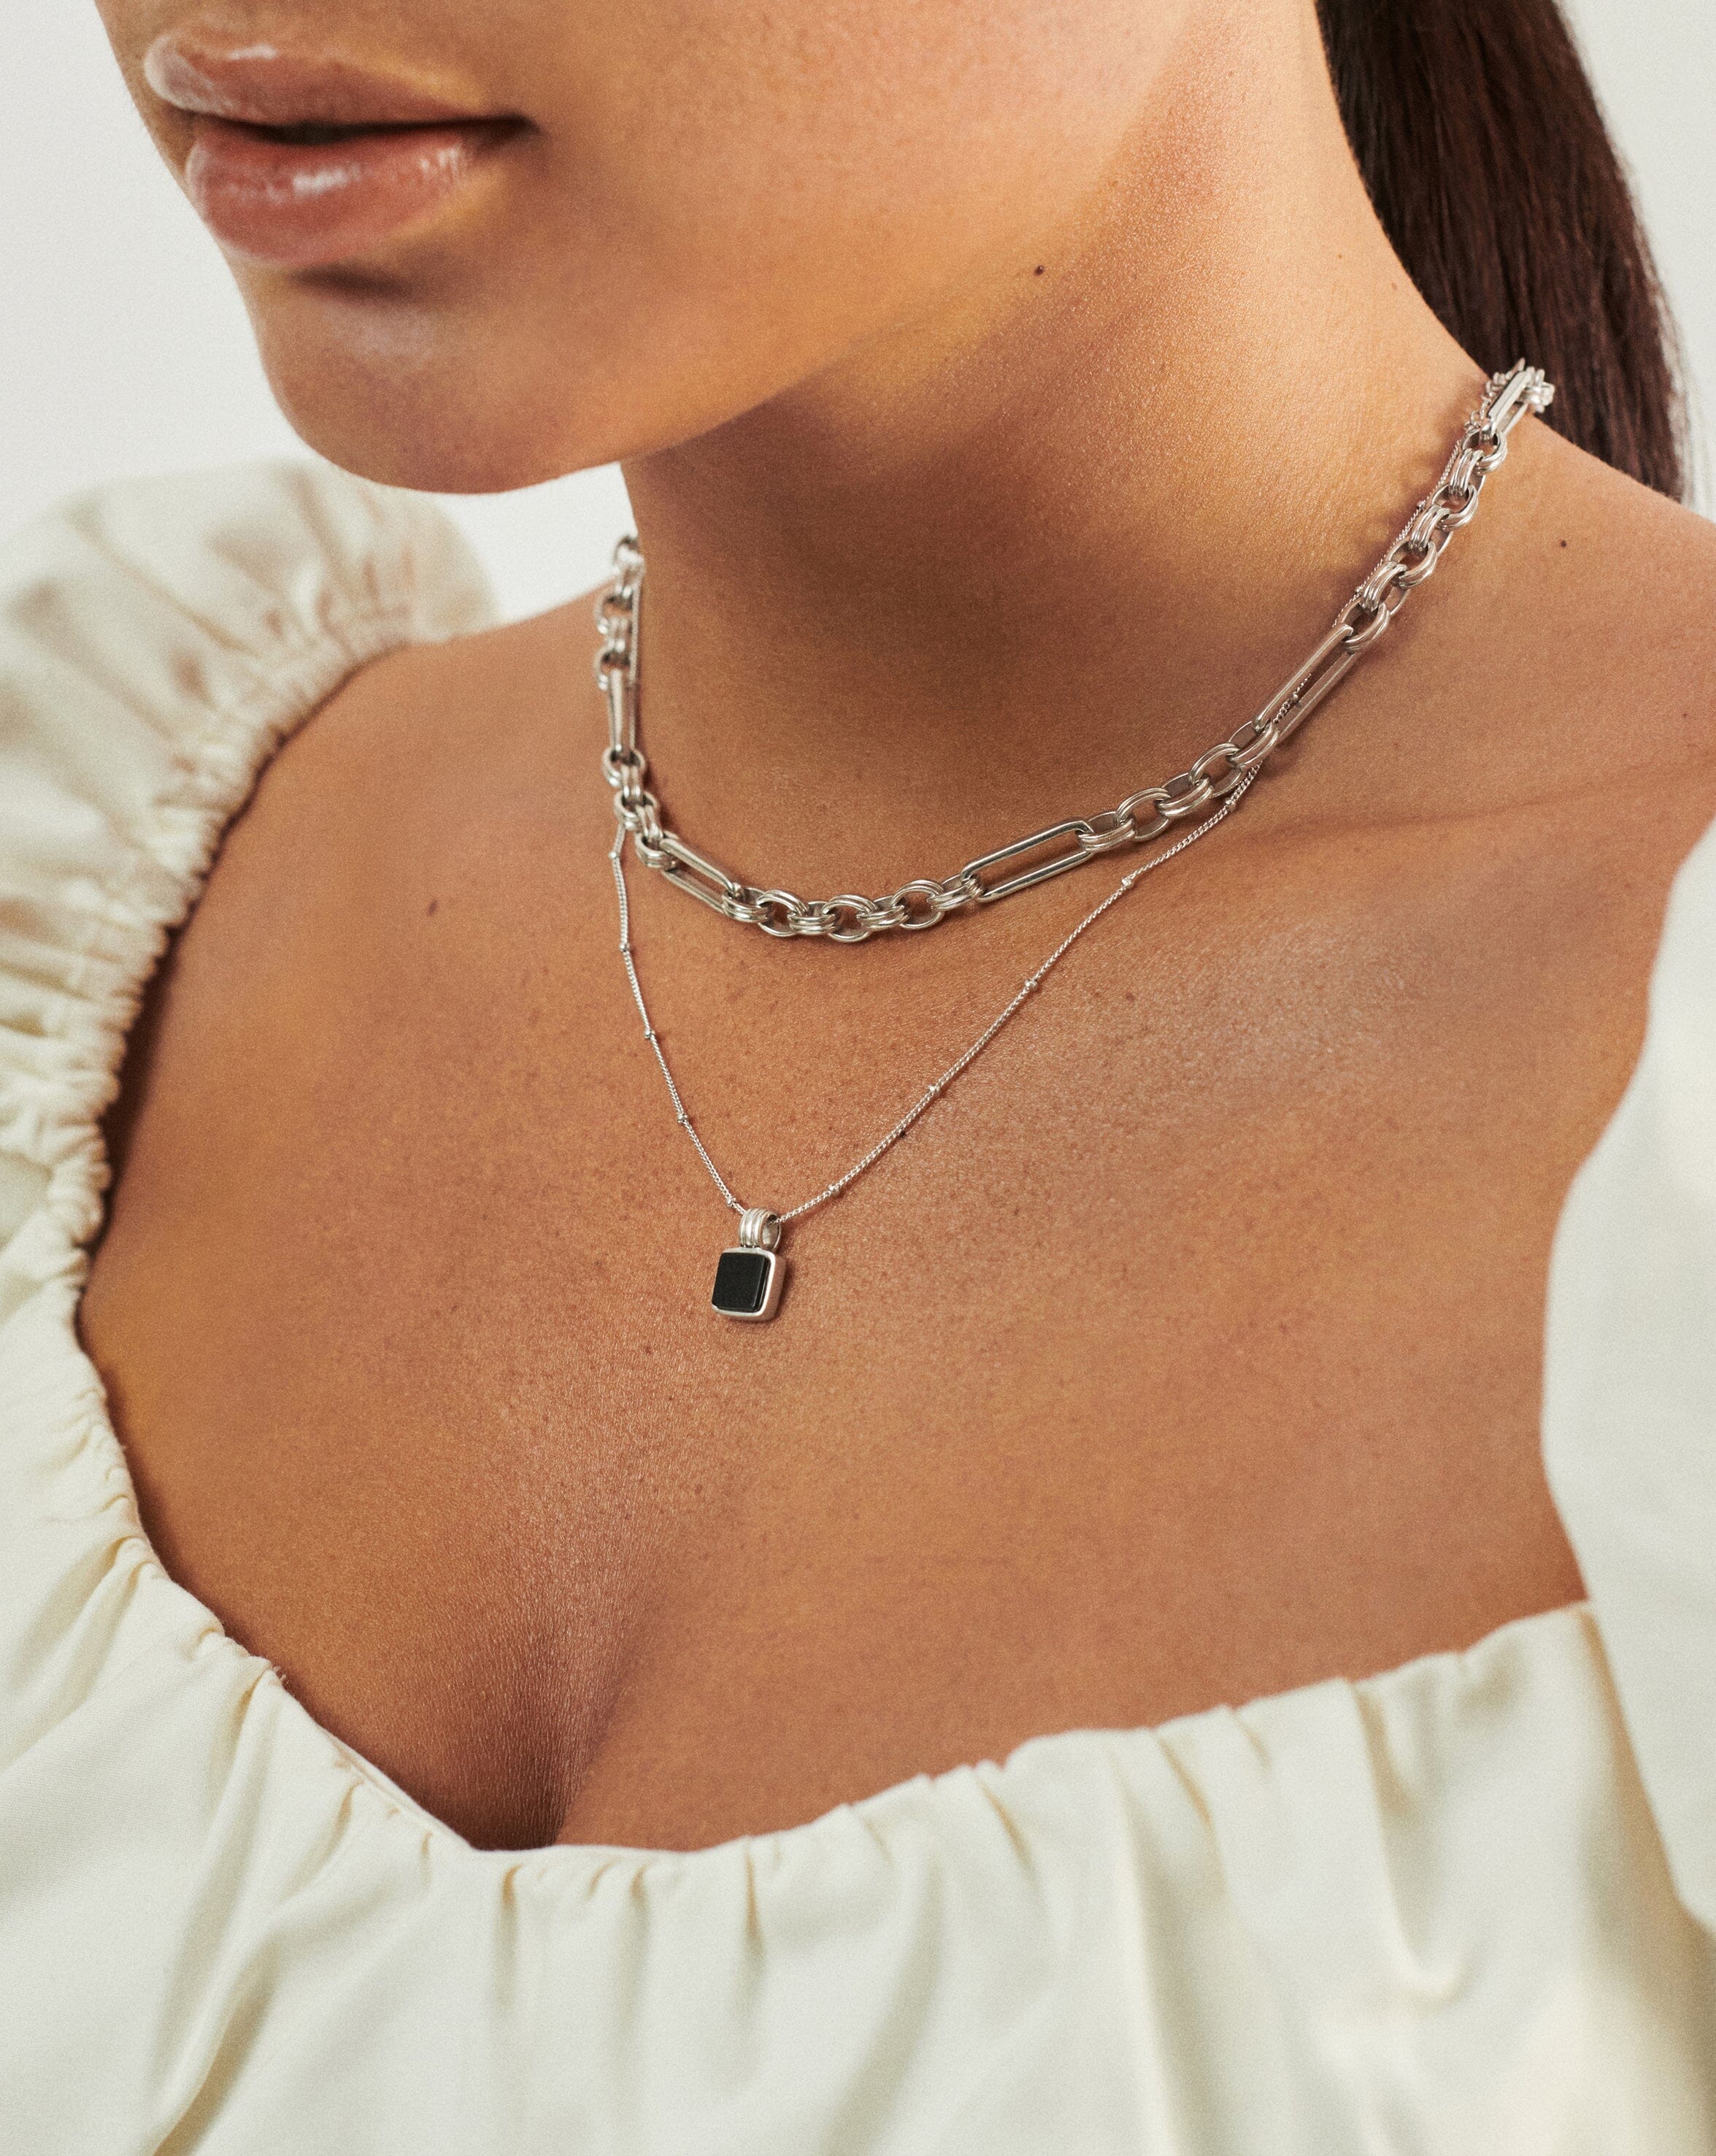 Lucy Williams Square Onyx Gemstone Necklace | Sterling Silver/Black Onyx